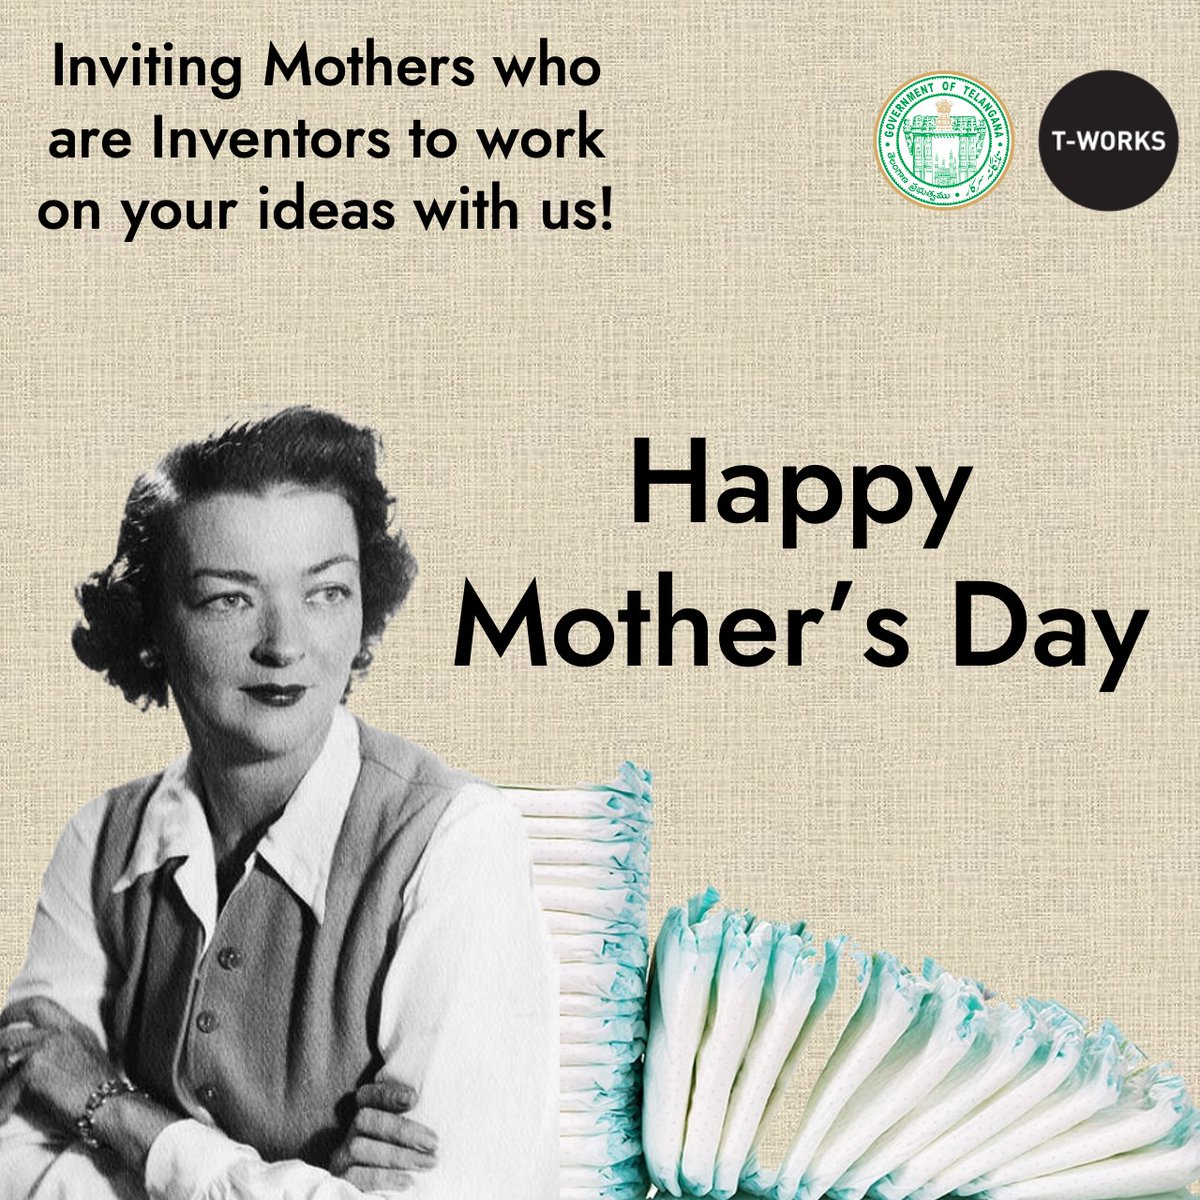 🌷 Happy Mother's Day! Today, we celebrate innovative moms like Marion Donovan, creator of the Disposable Diaper & other inventions. Let's honor the creativity and ingenuity of mothers. Join us at T-Works, where your ideas can make a difference! #MothersDay #InnovativeMothers